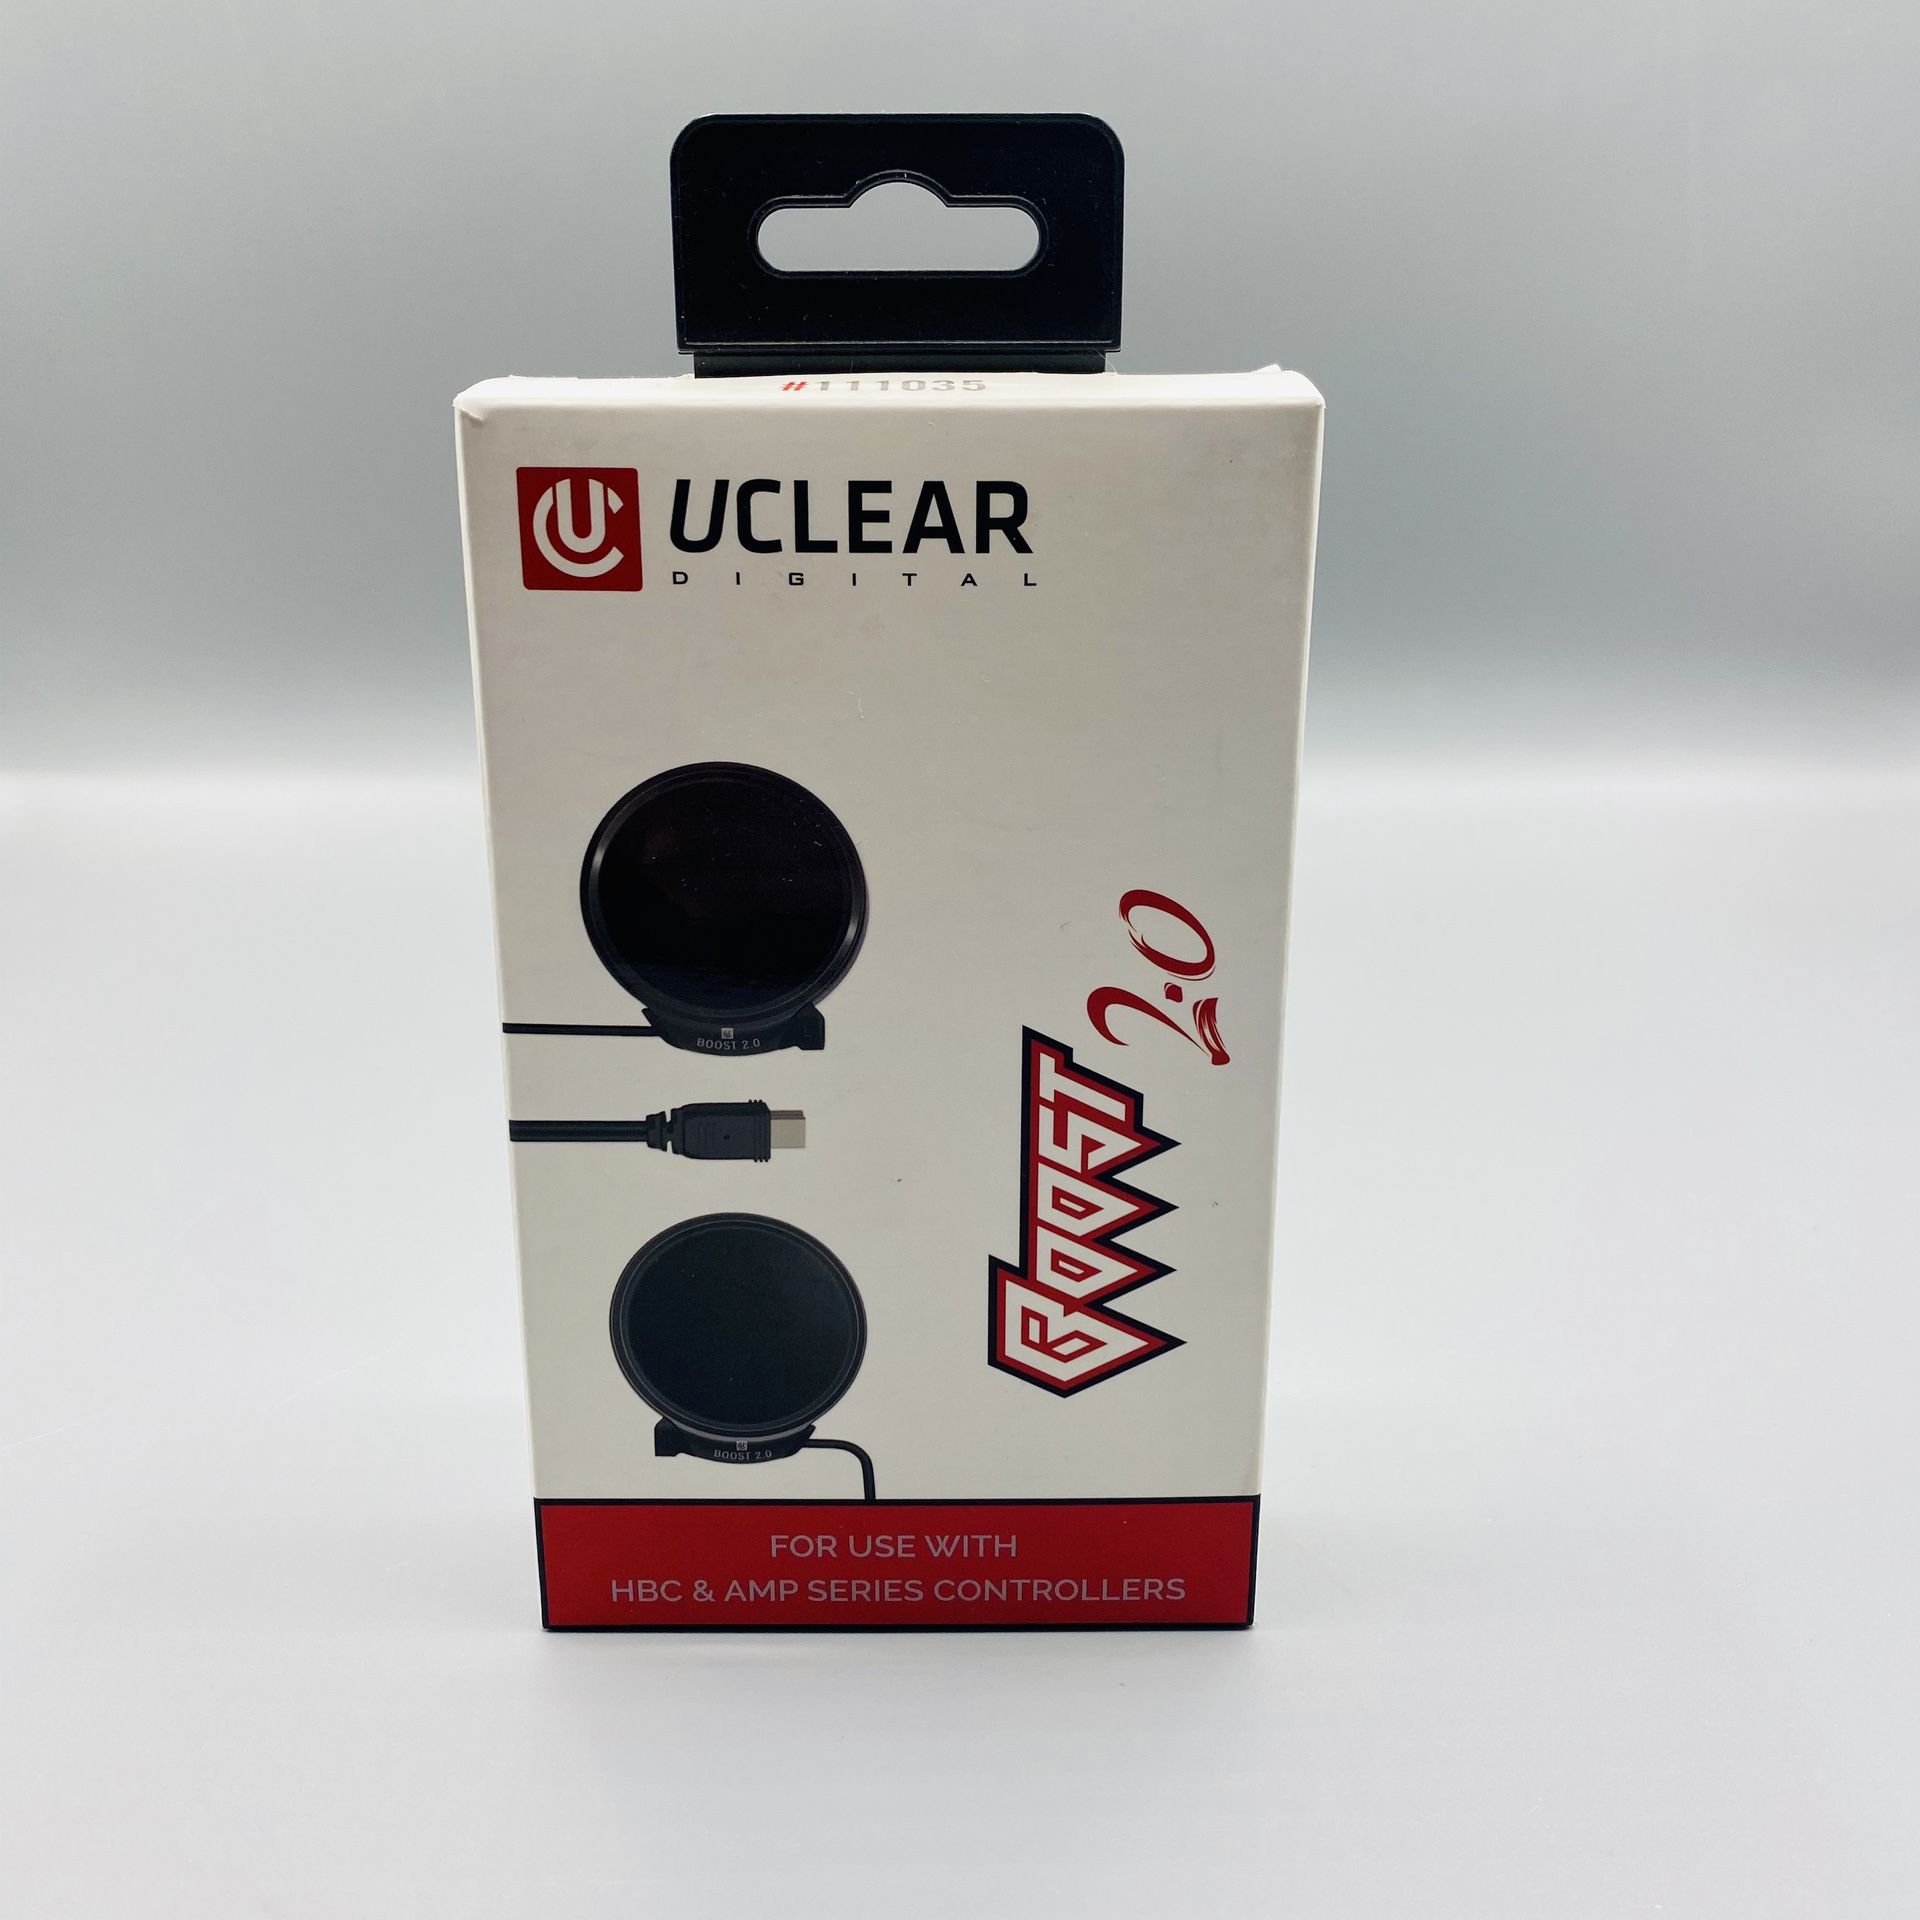 UCLEAR 2.0 Dual Microphone Speakers & Mounting Round Kit